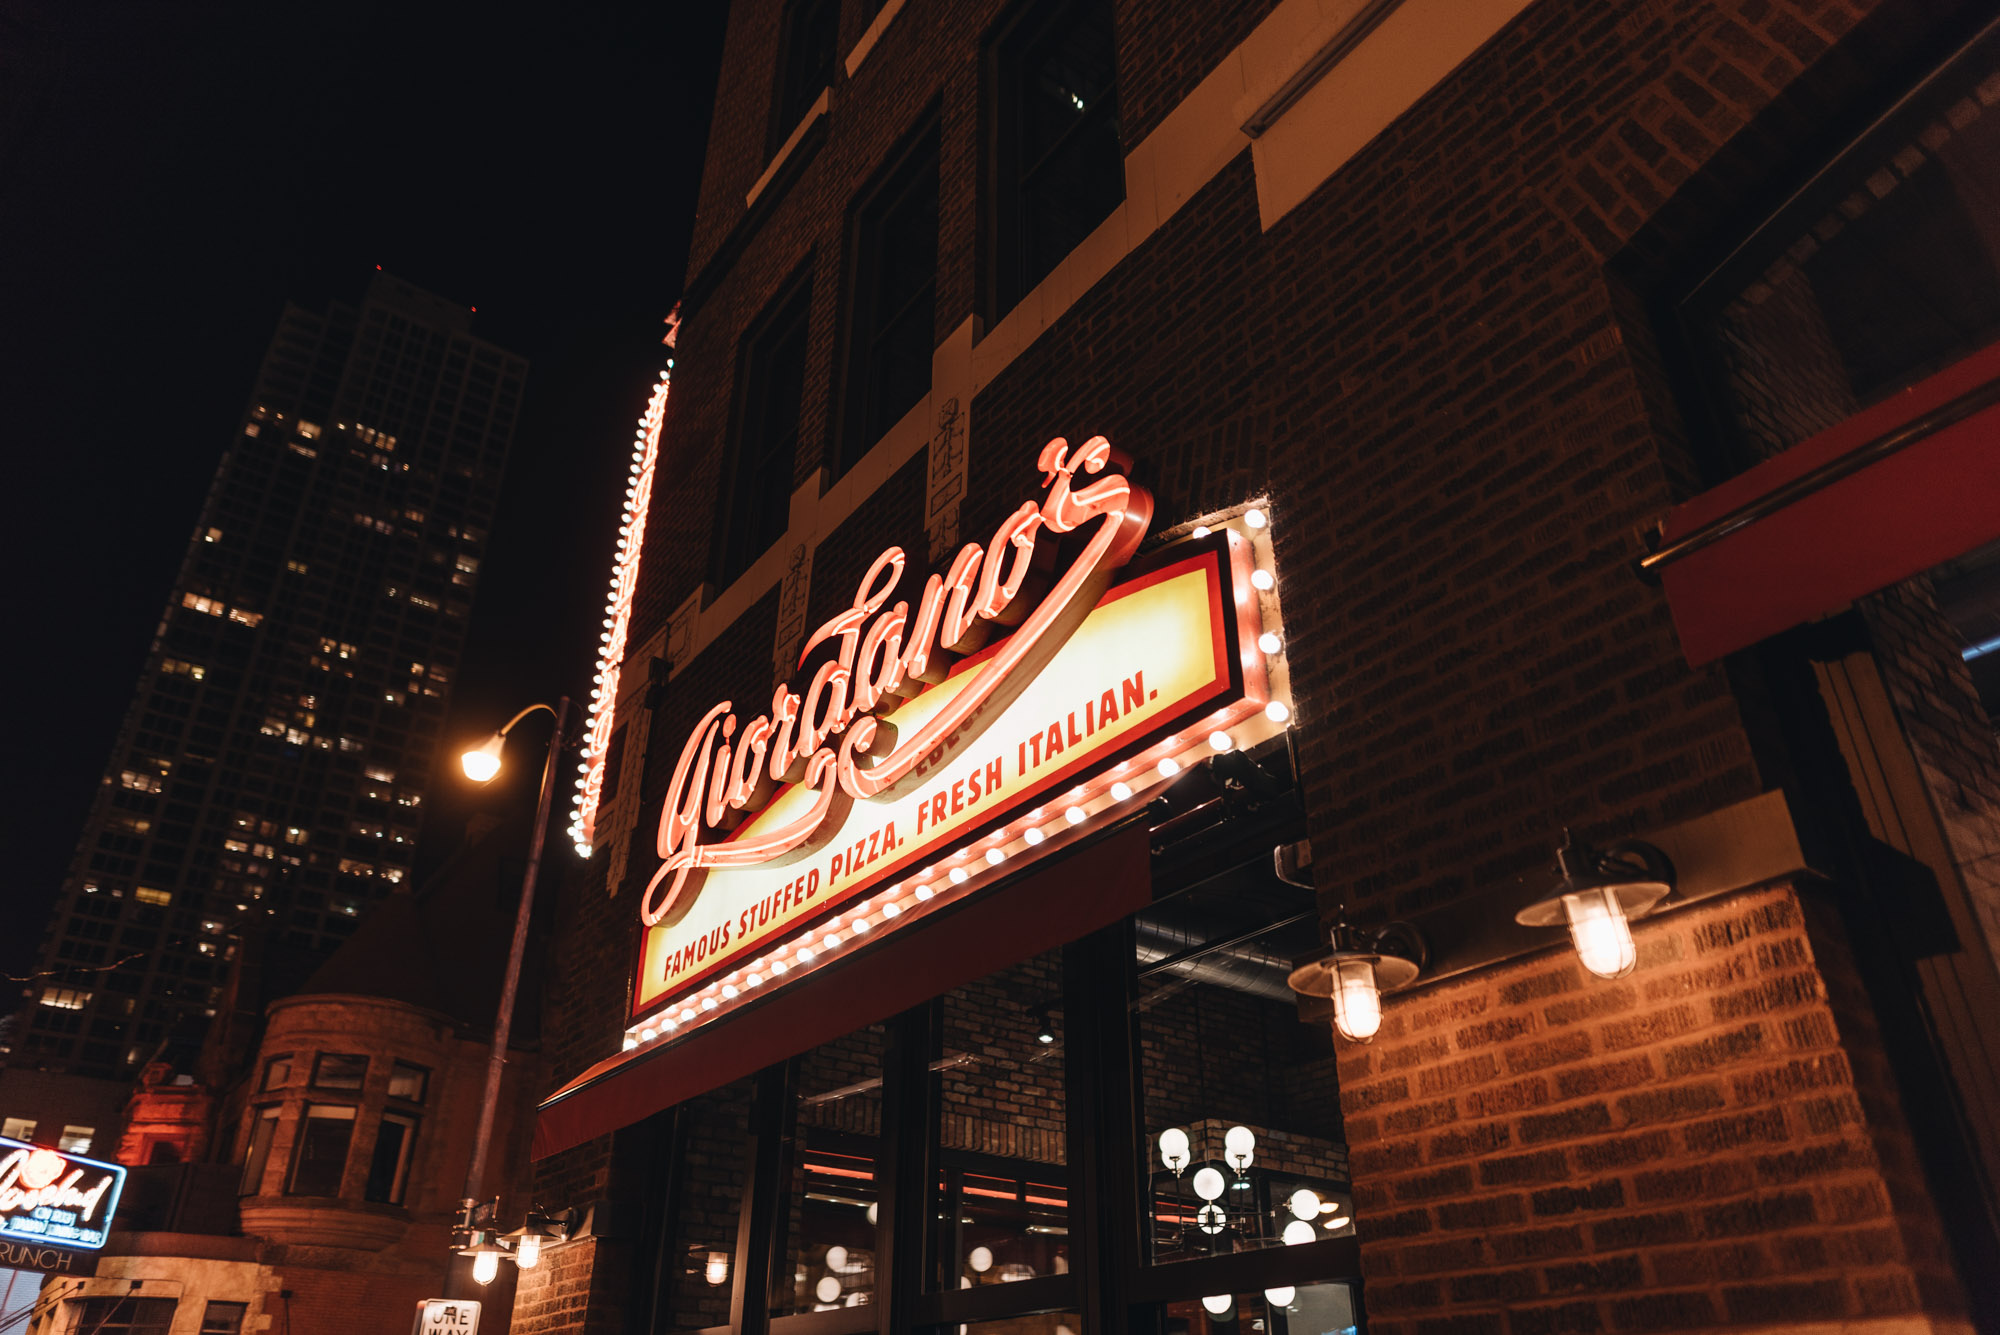 Jeff On The Road - Travel - Chicago - Where to eat - Giordano's Deep Dish Pizza - All photos are under Copyright © 2017 Jeff Frenette Photography / dezjeff. To use the photos, please contact me at dezjeff@me.com.